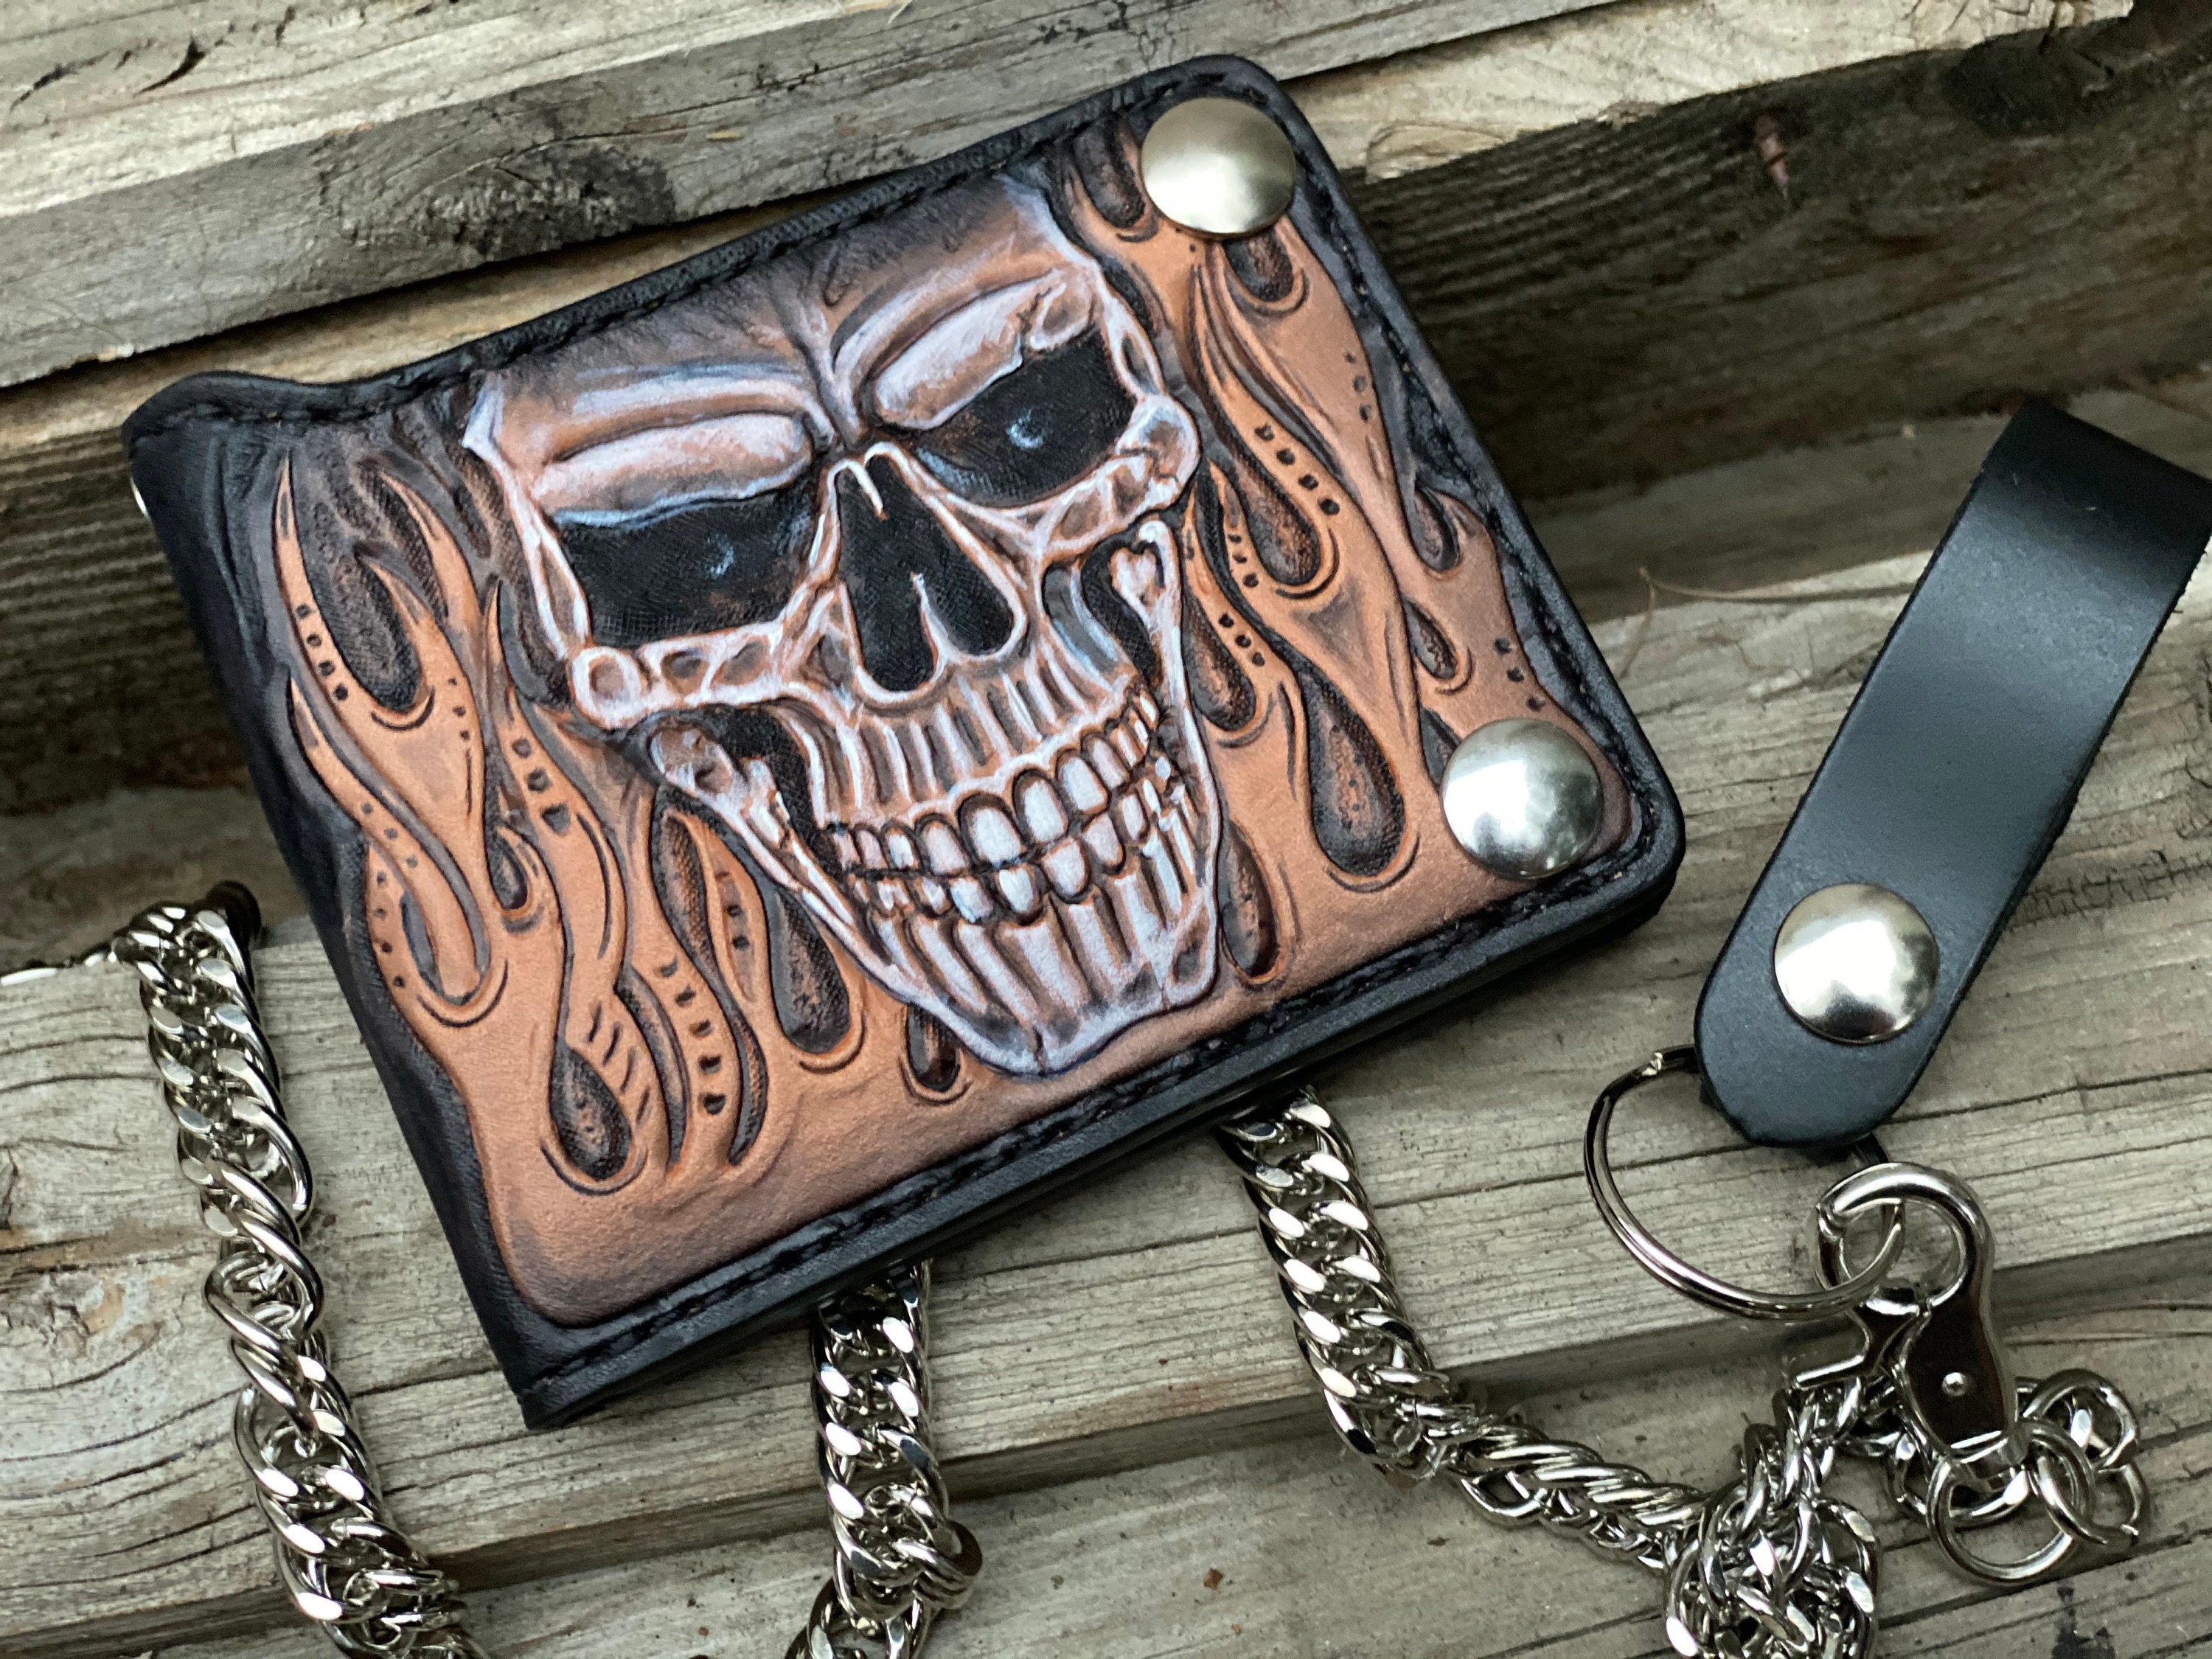 Skull and Flames Leather Biker Wallet - CHRISTOPH JOSEPH LEATHER